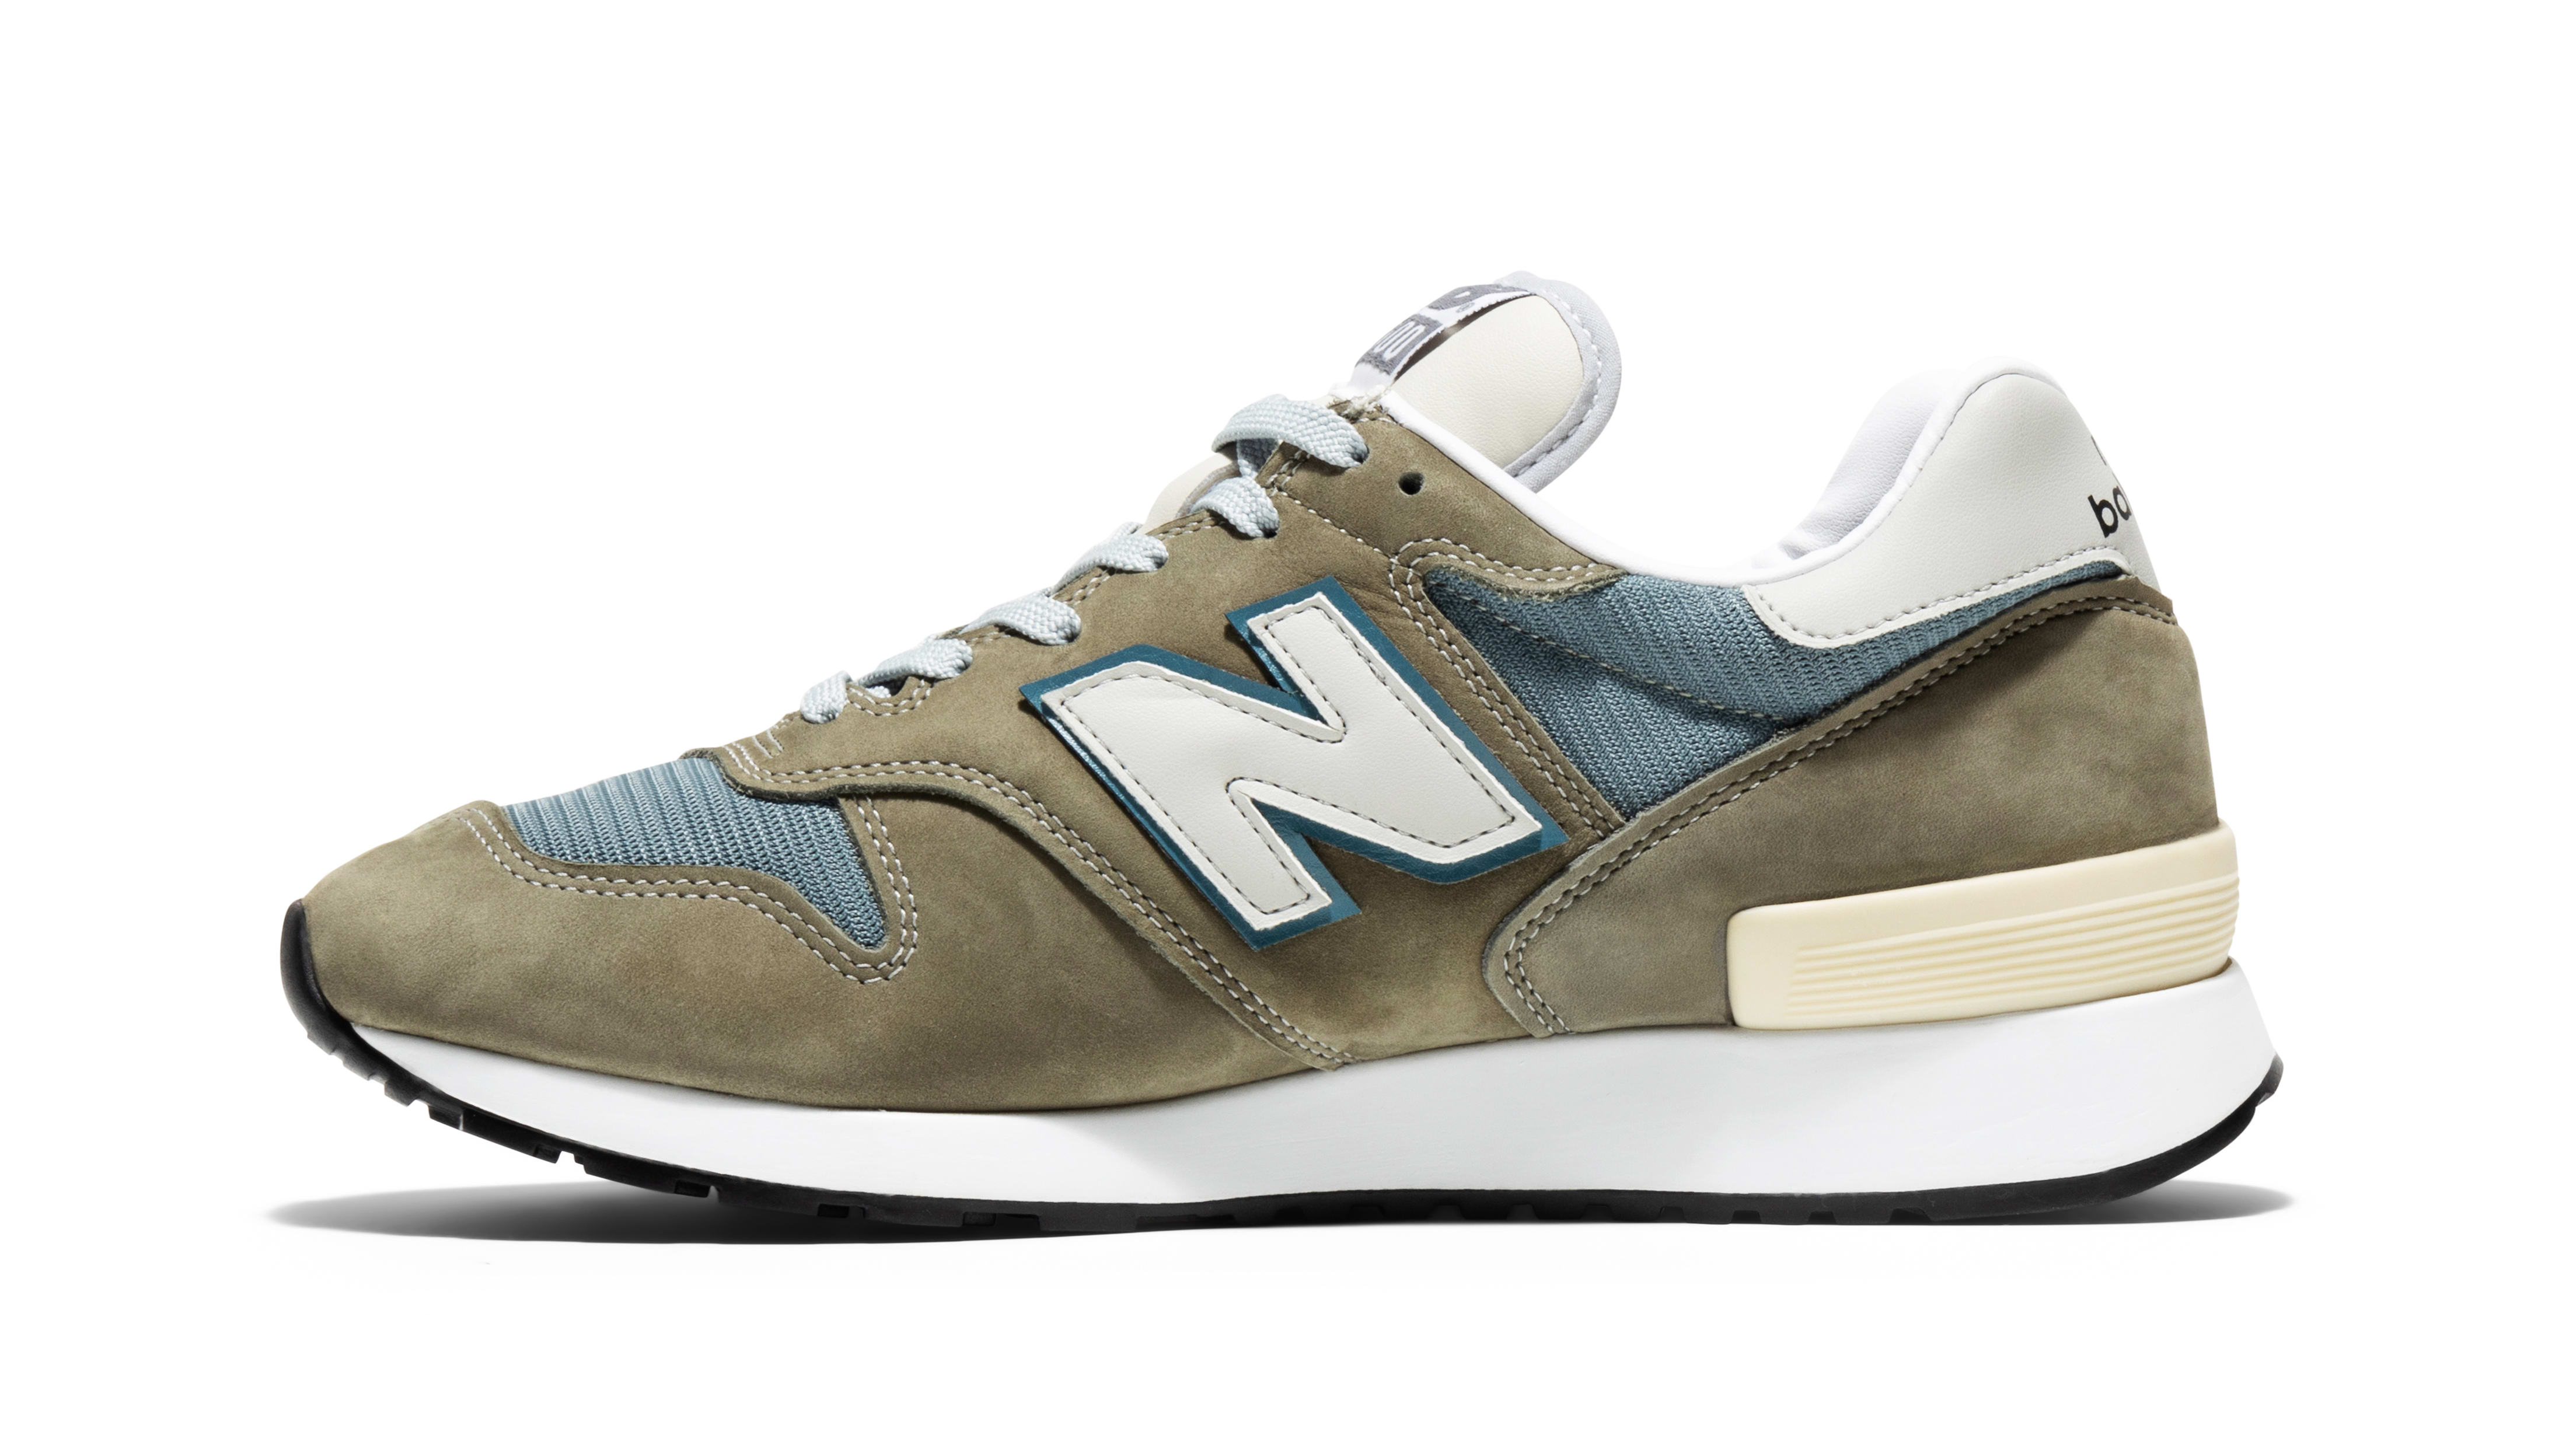 New Balance 1300JP 2020 Release Date | Sole Collector